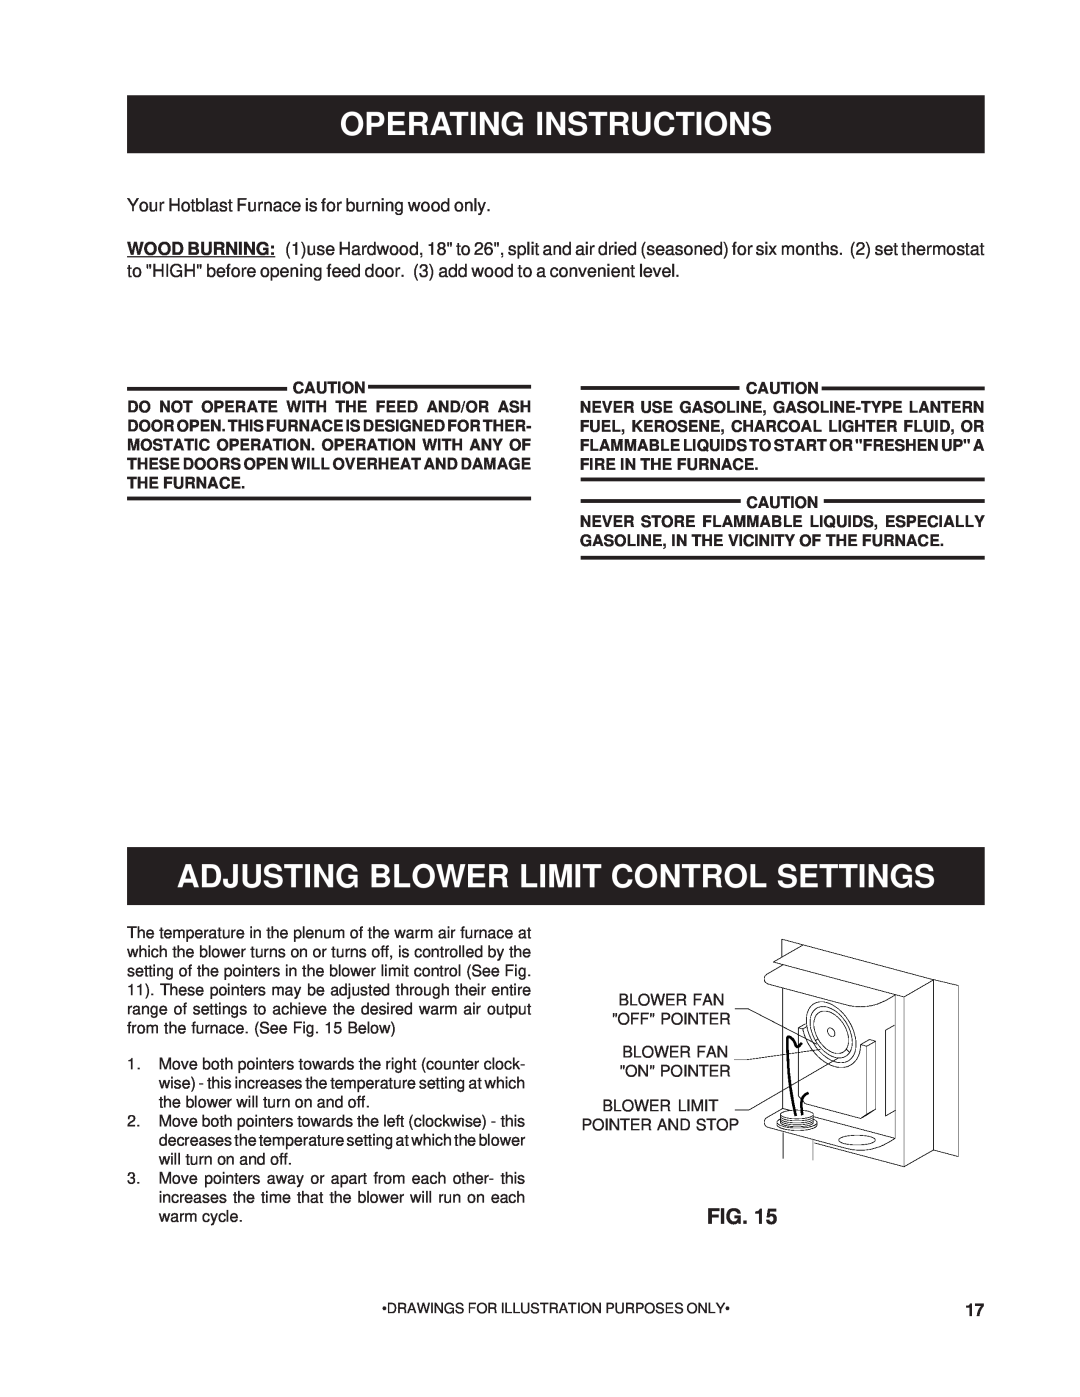 United States Stove 1200G owner manual Operating Instructions, Adjusting Blower Limit Control Settings 